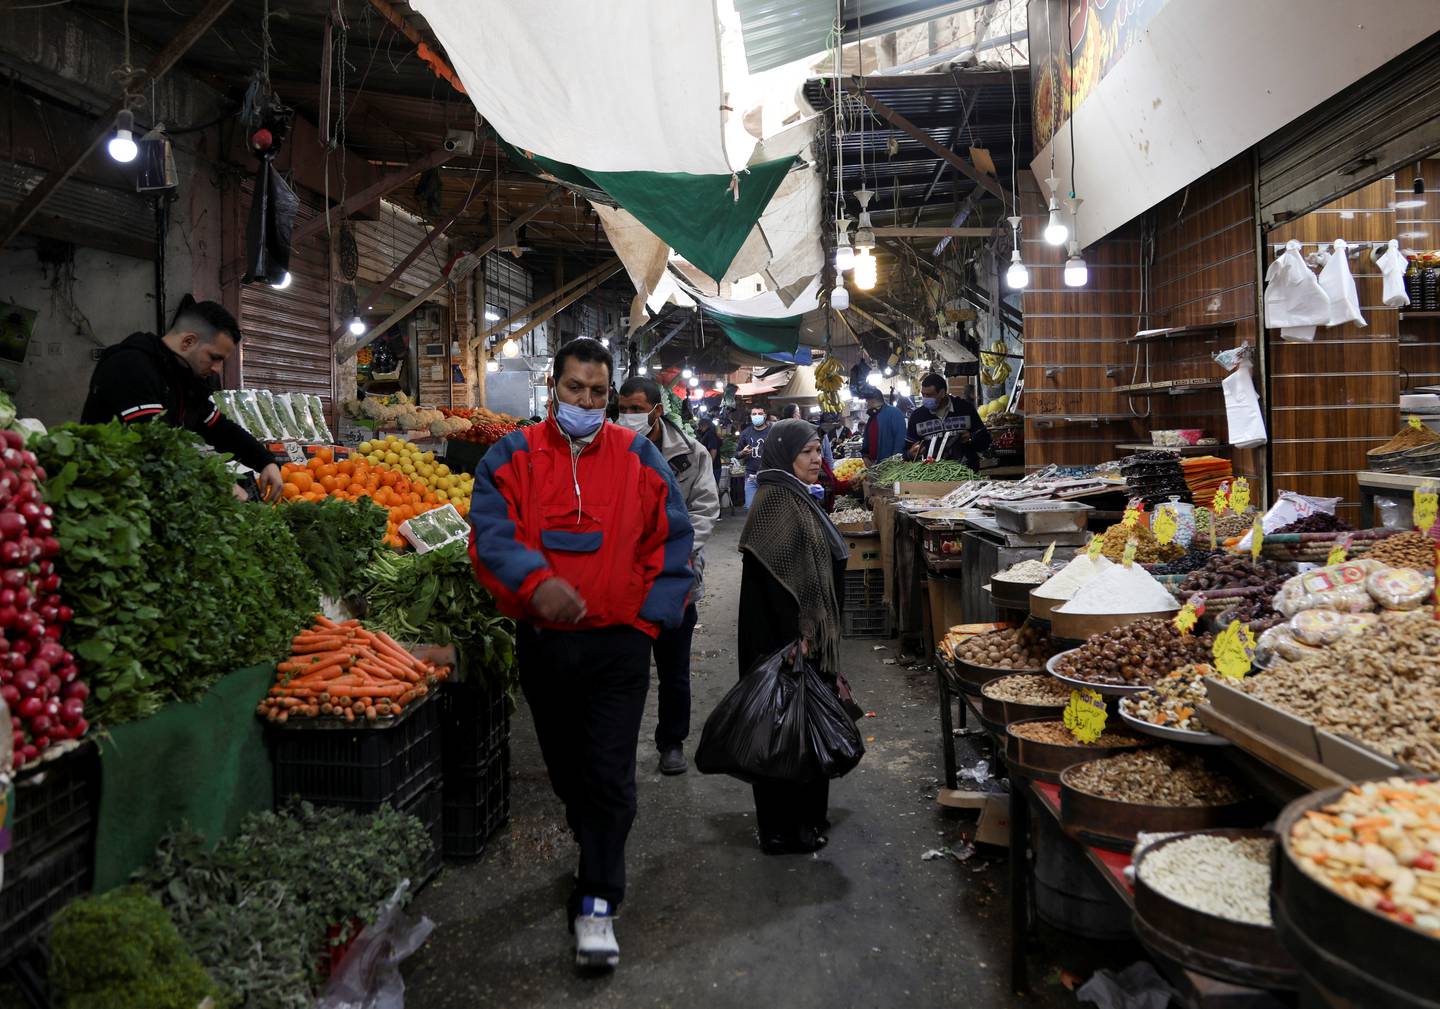 People walk at a market, amid concerns about the spread of the coronavirus in Amman, Jordan. Reuters